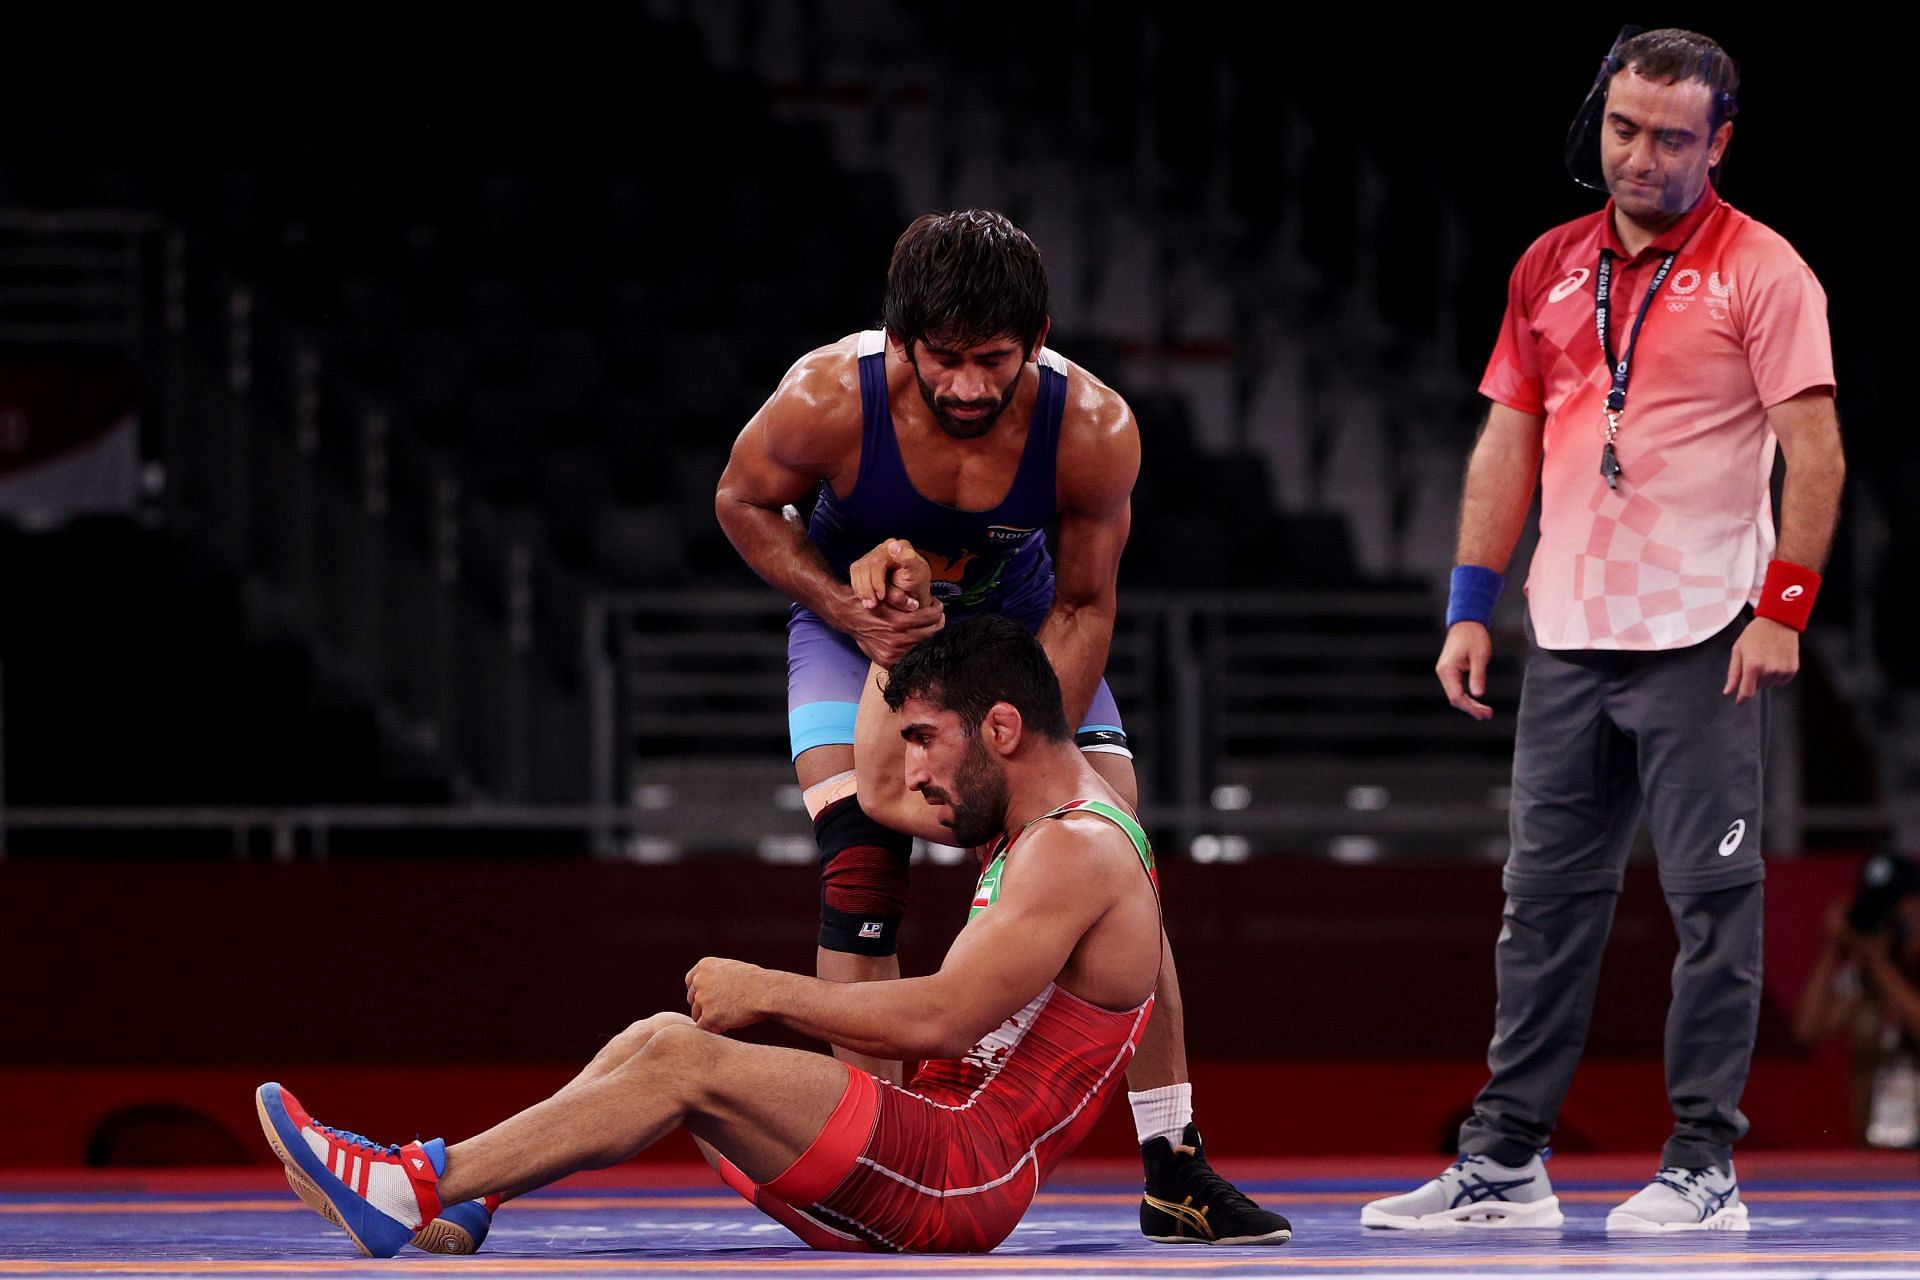 Indian wrestler Bajrang Punia at the Tokyo Olympics. (PC: Getty Images)